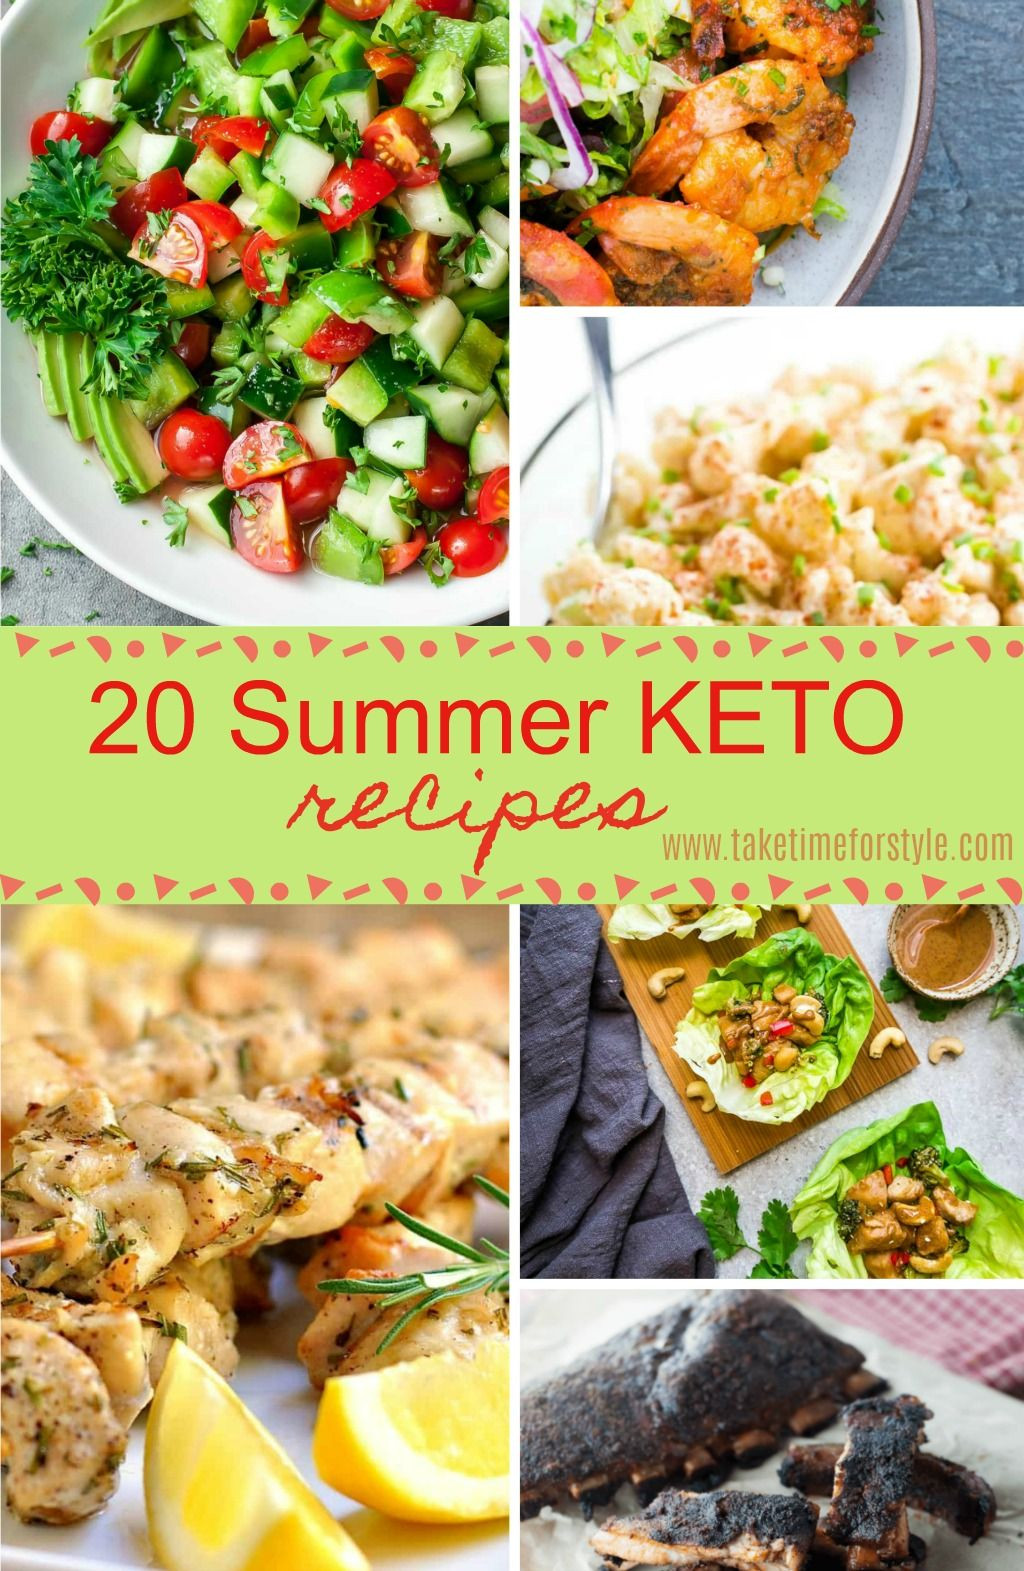 Summer Keto Meal Ideas There are 20 summer keto recipes here from keto main